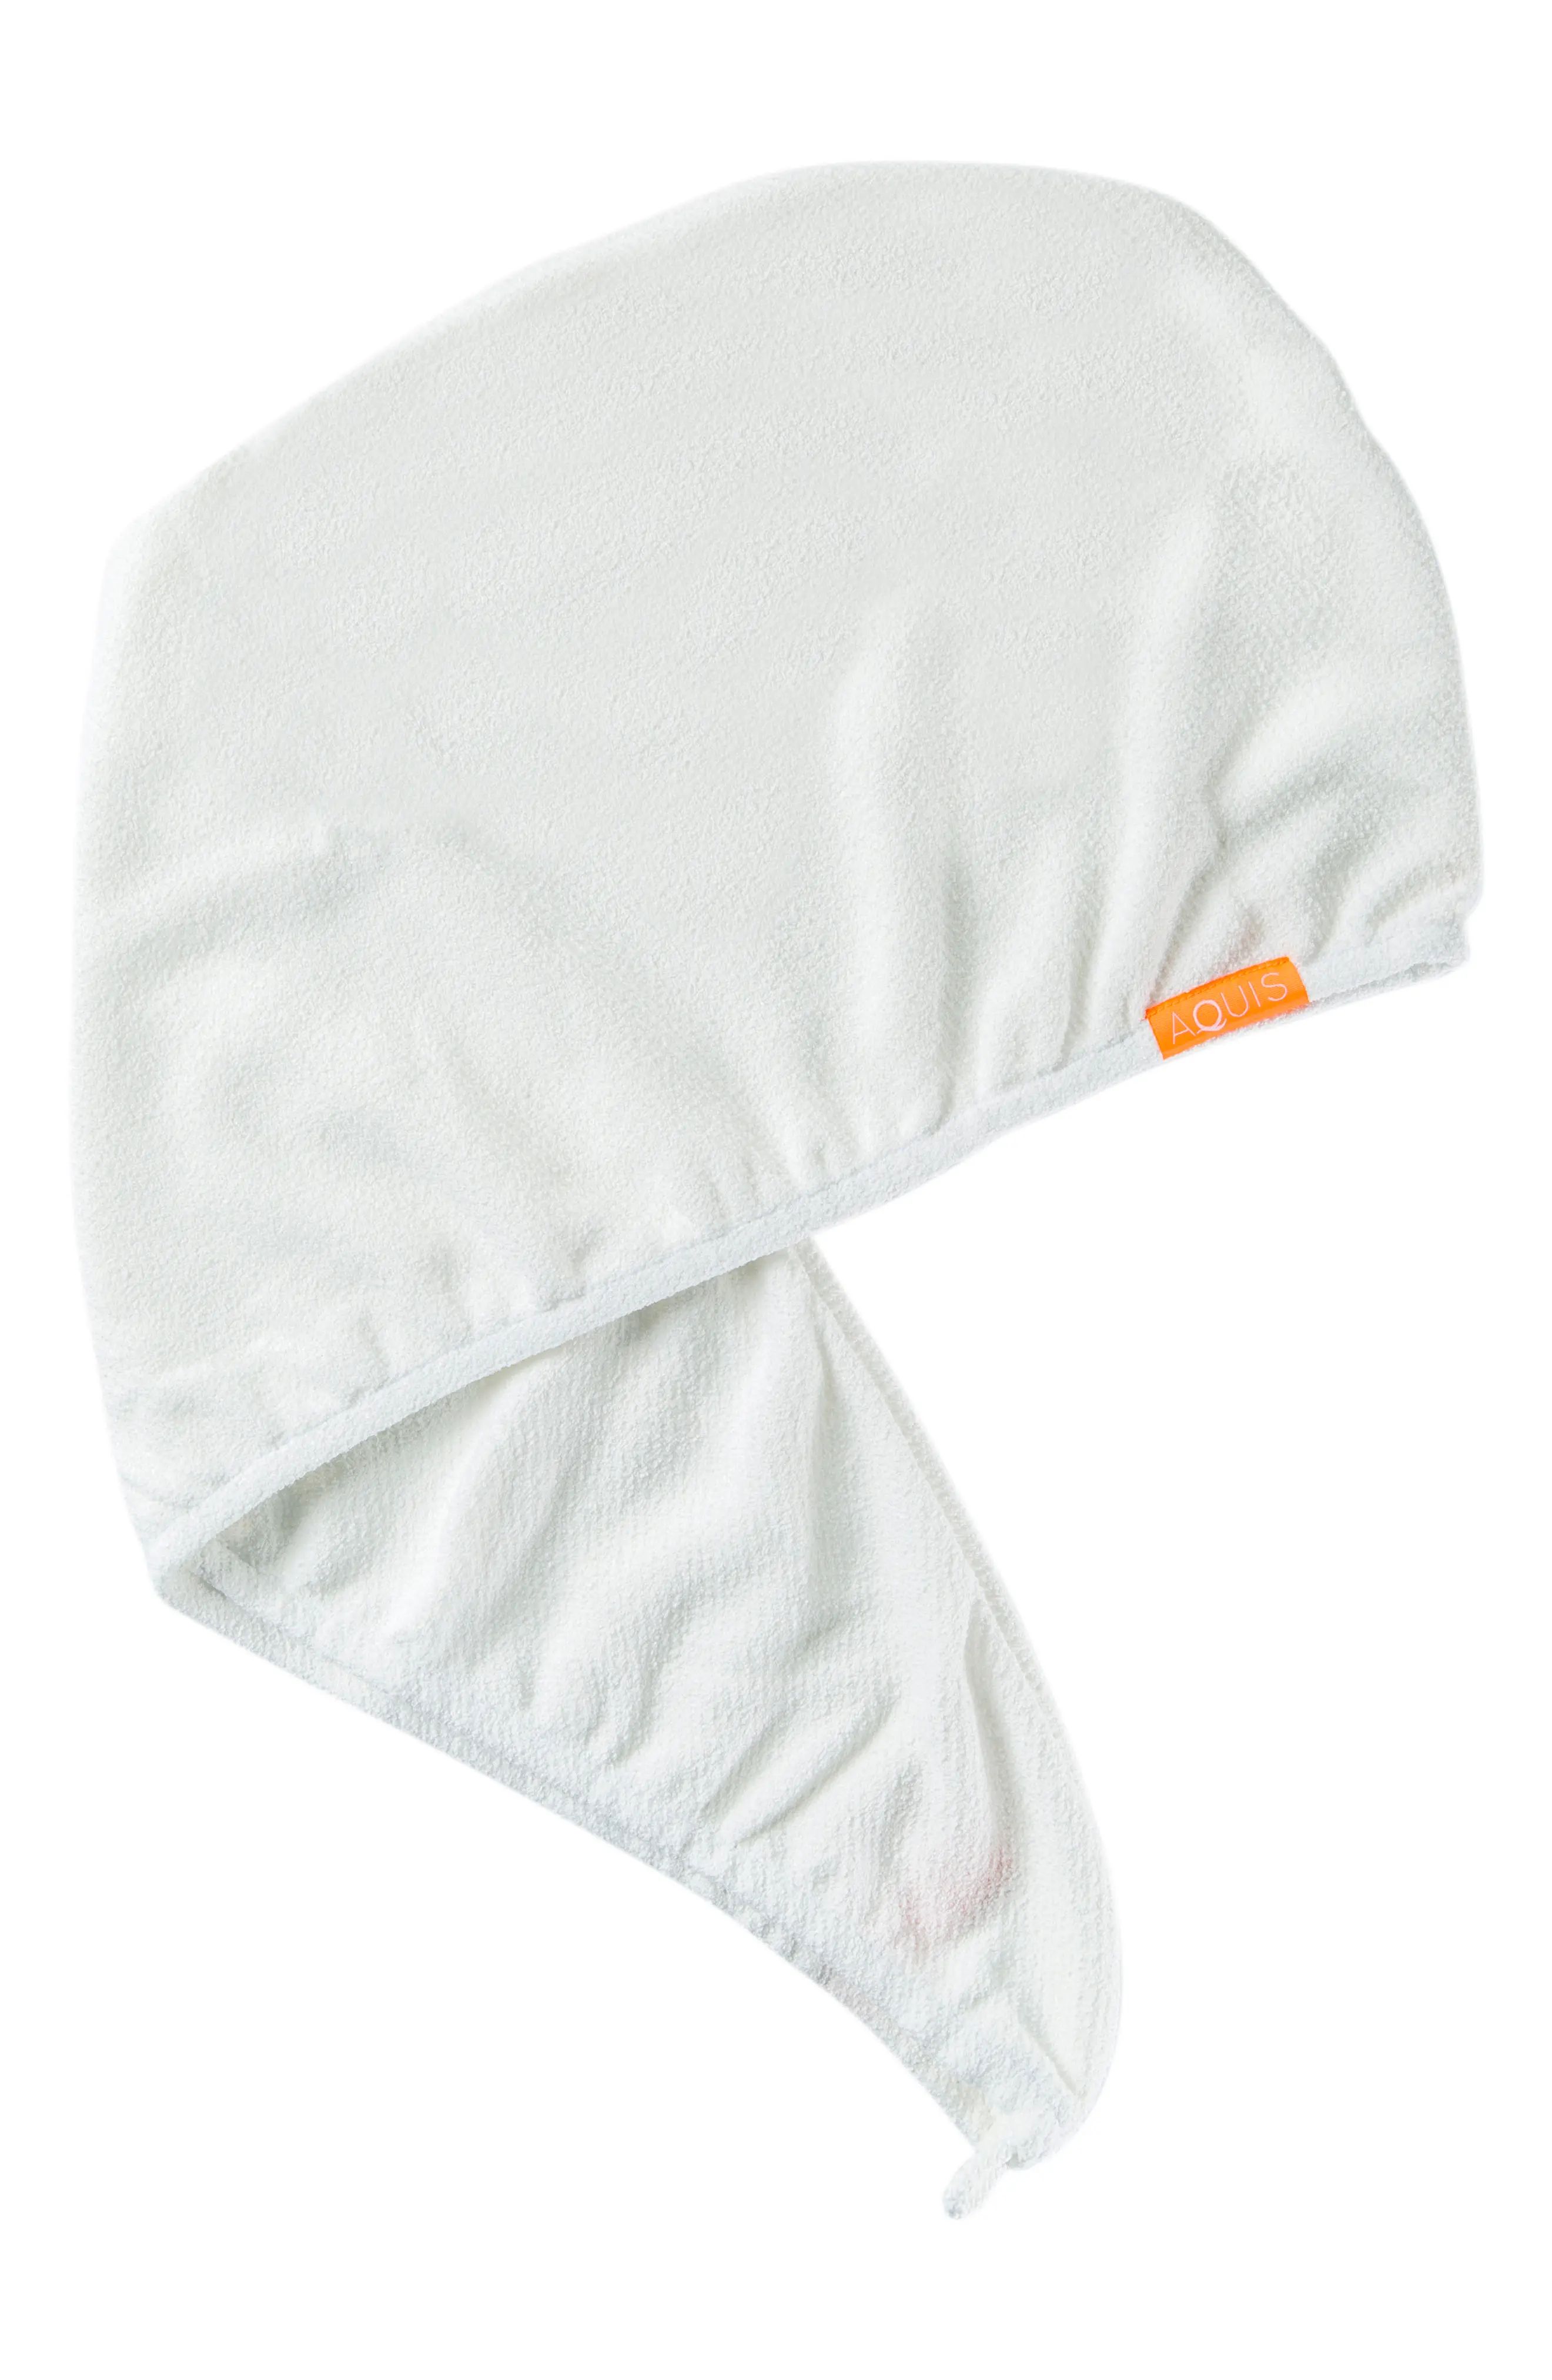 AQUIS Rapid Dry Lisse Hair Wrap Towel in White at Nordstrom | Nordstrom